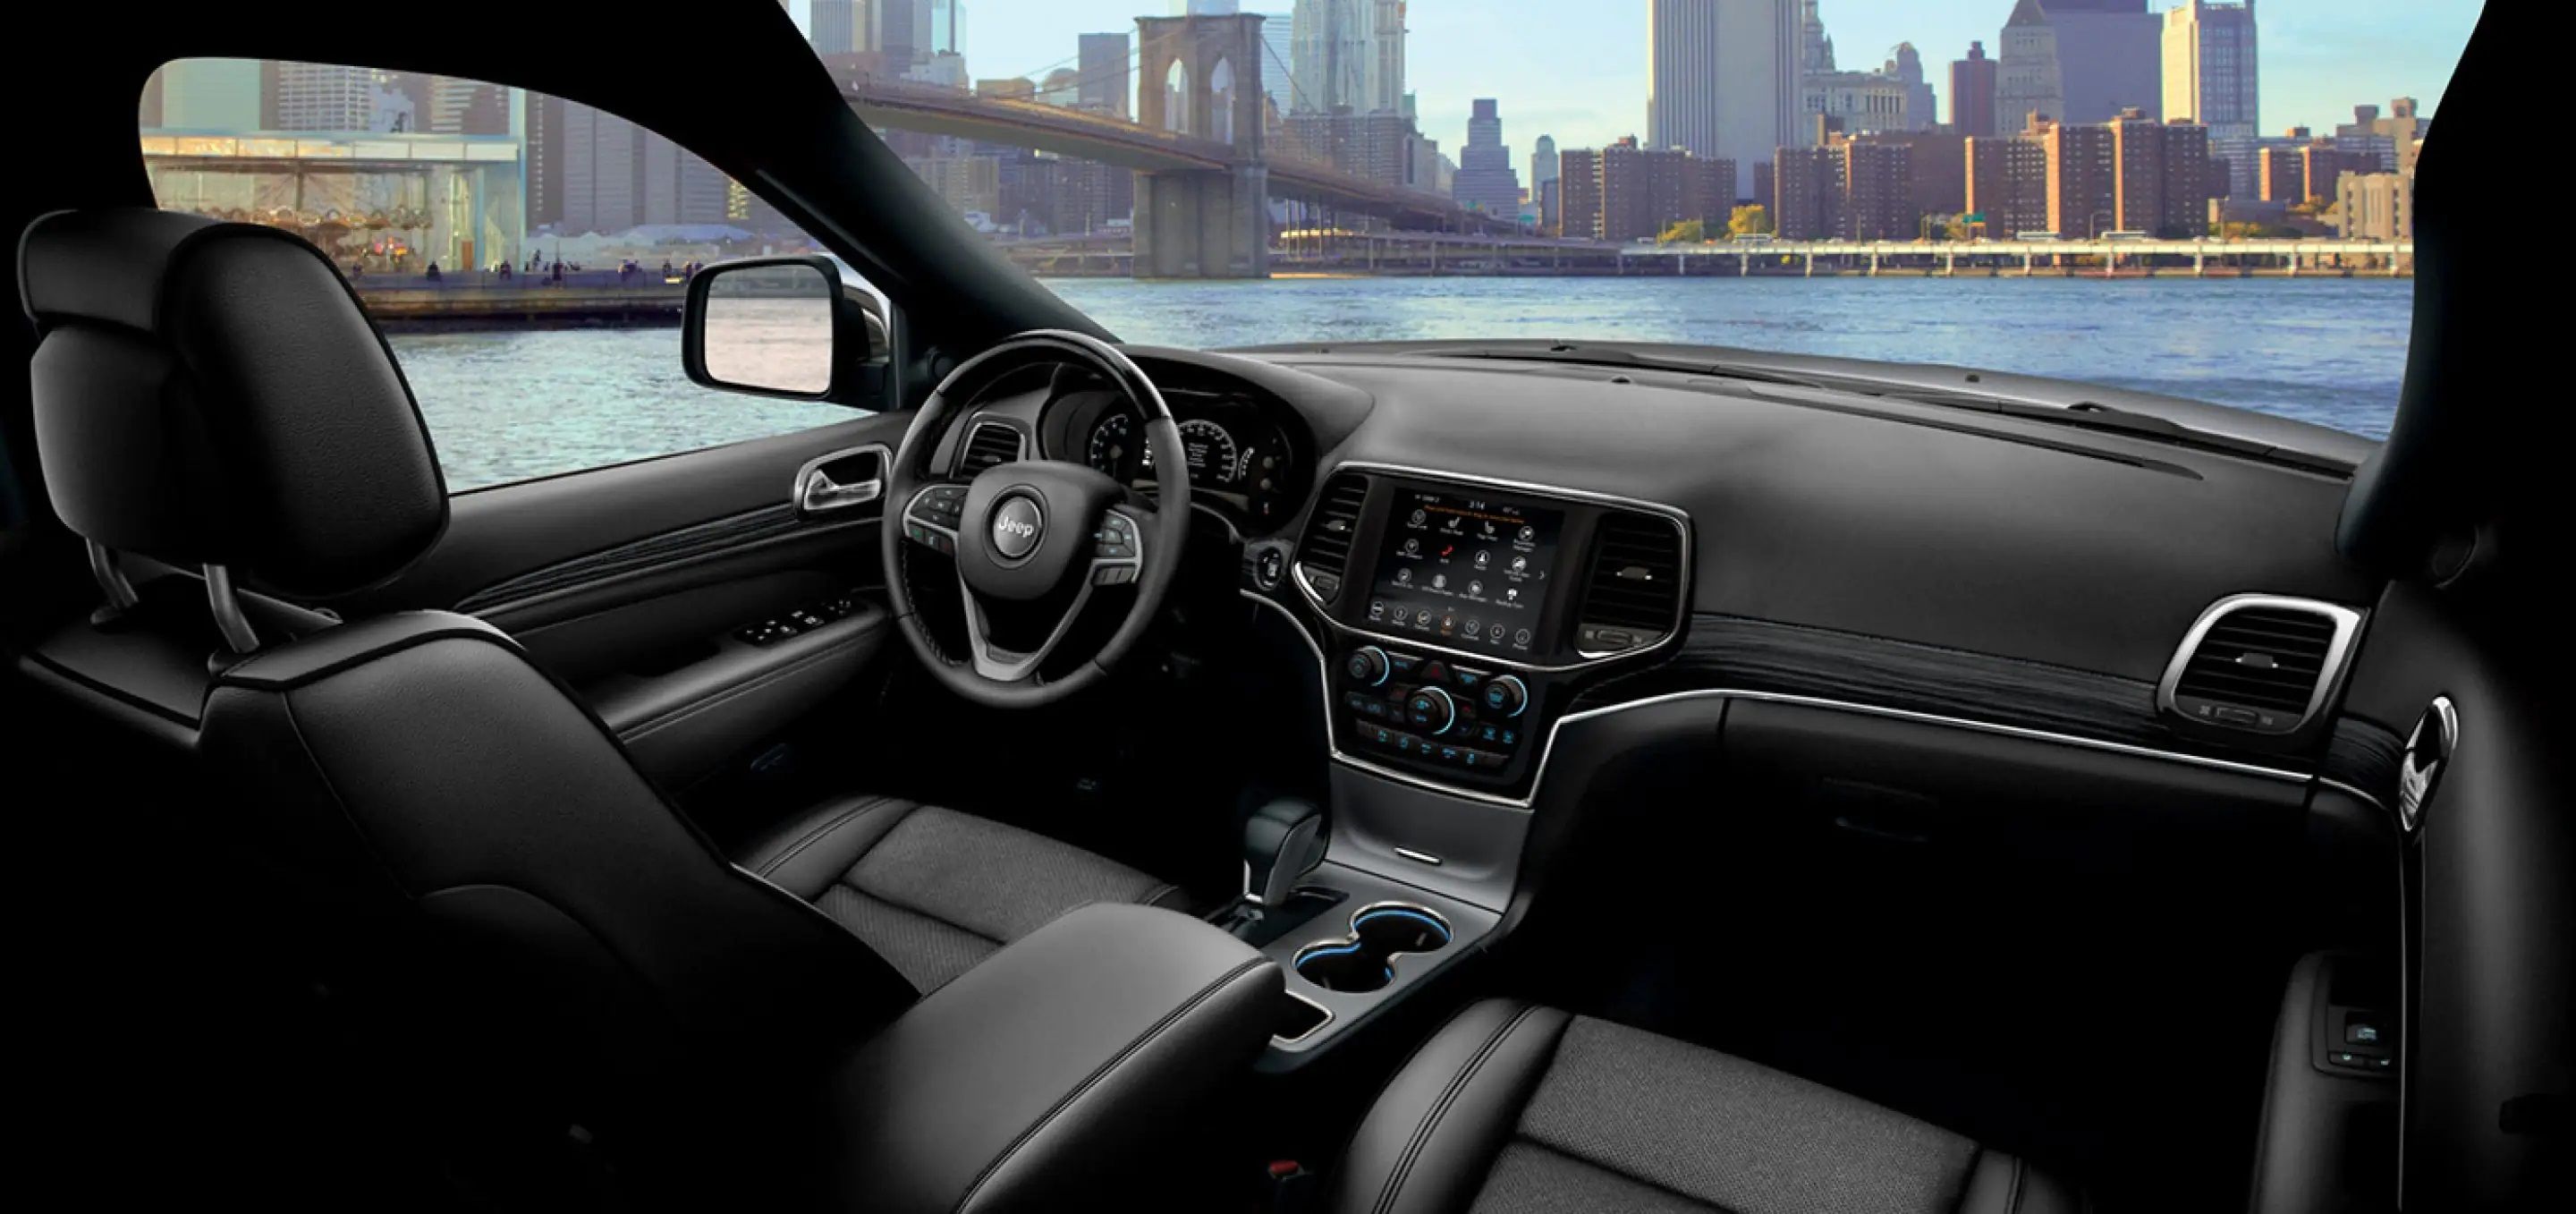 The interior of the 2022 Jeep Grand Cherokee WK.